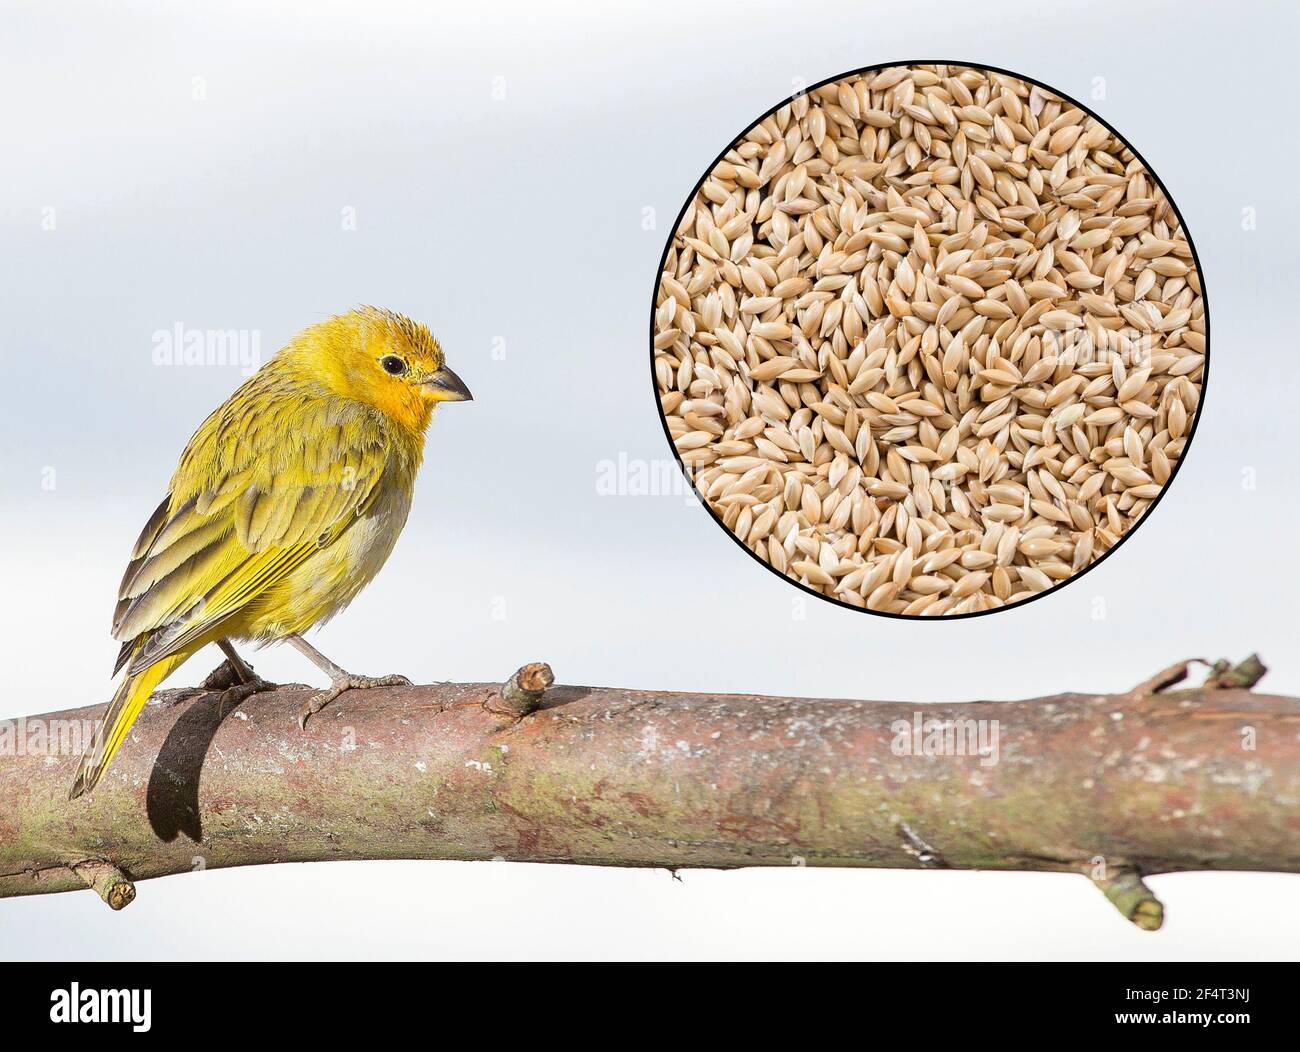 Canary seed - Phalaris canariensis. Text space Stock Photo